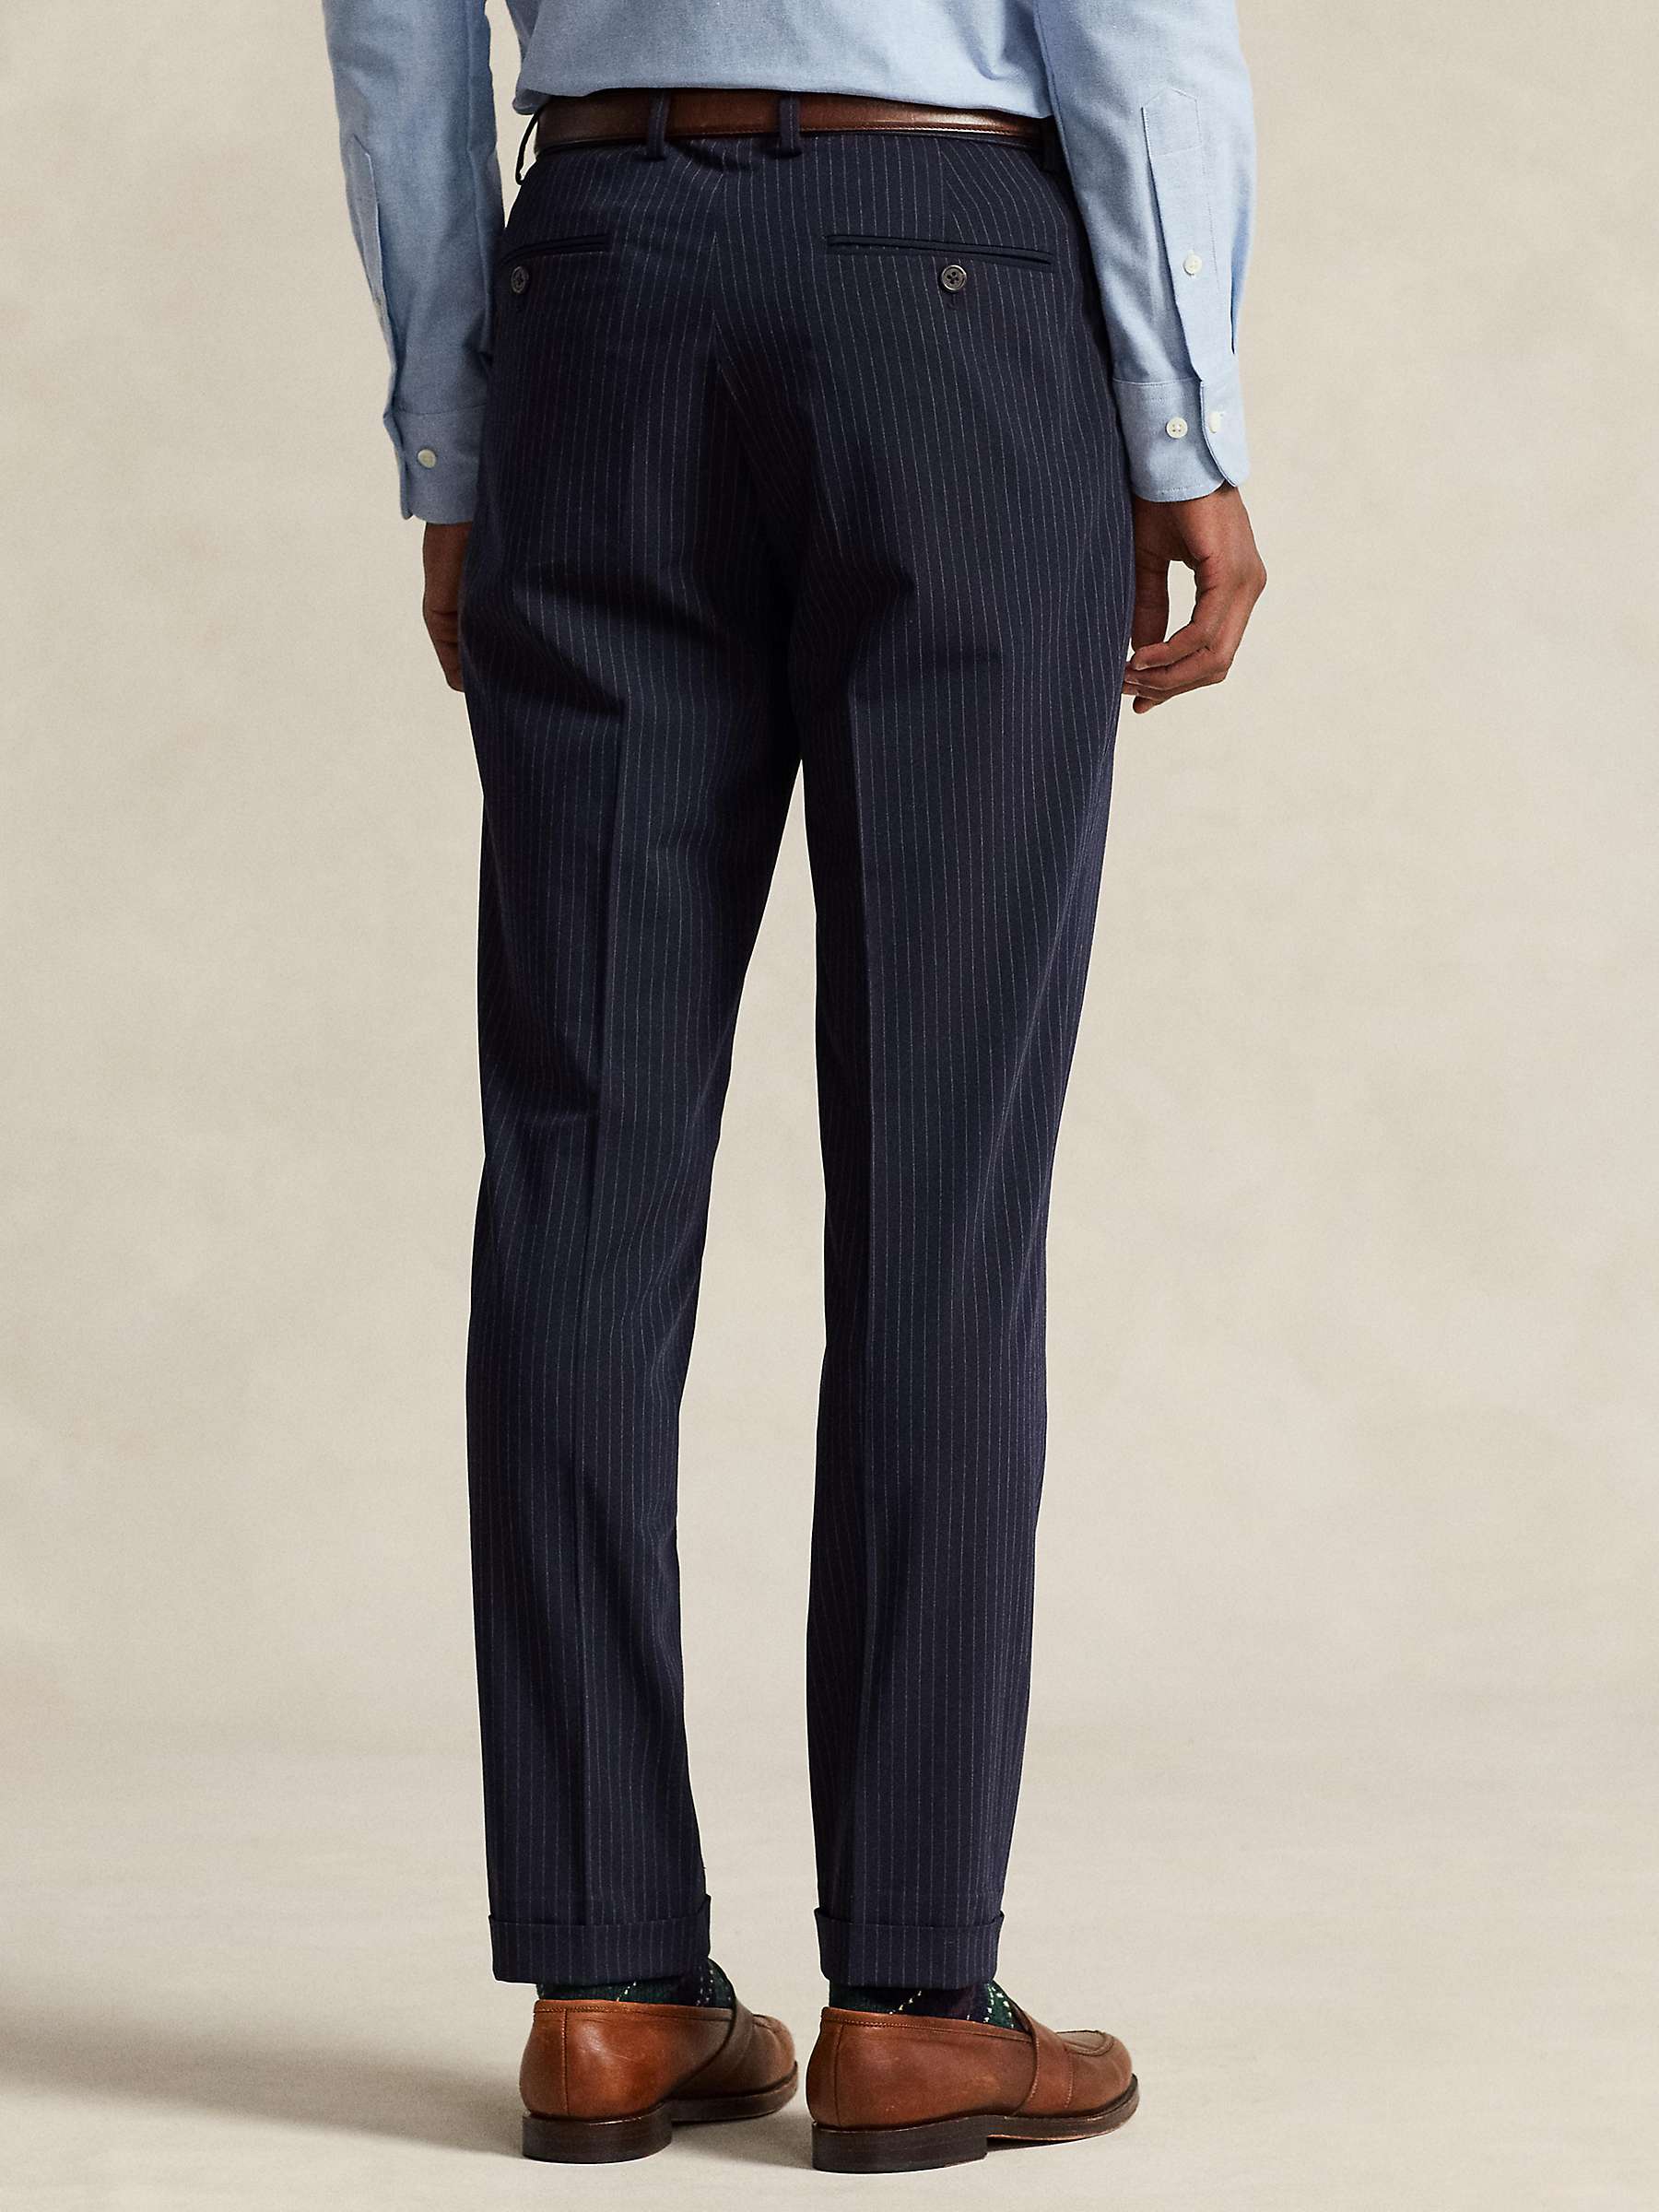 Buy Polo Ralph Lauren Performance Stretch Twill Trousers, Navy/Grey Online at johnlewis.com